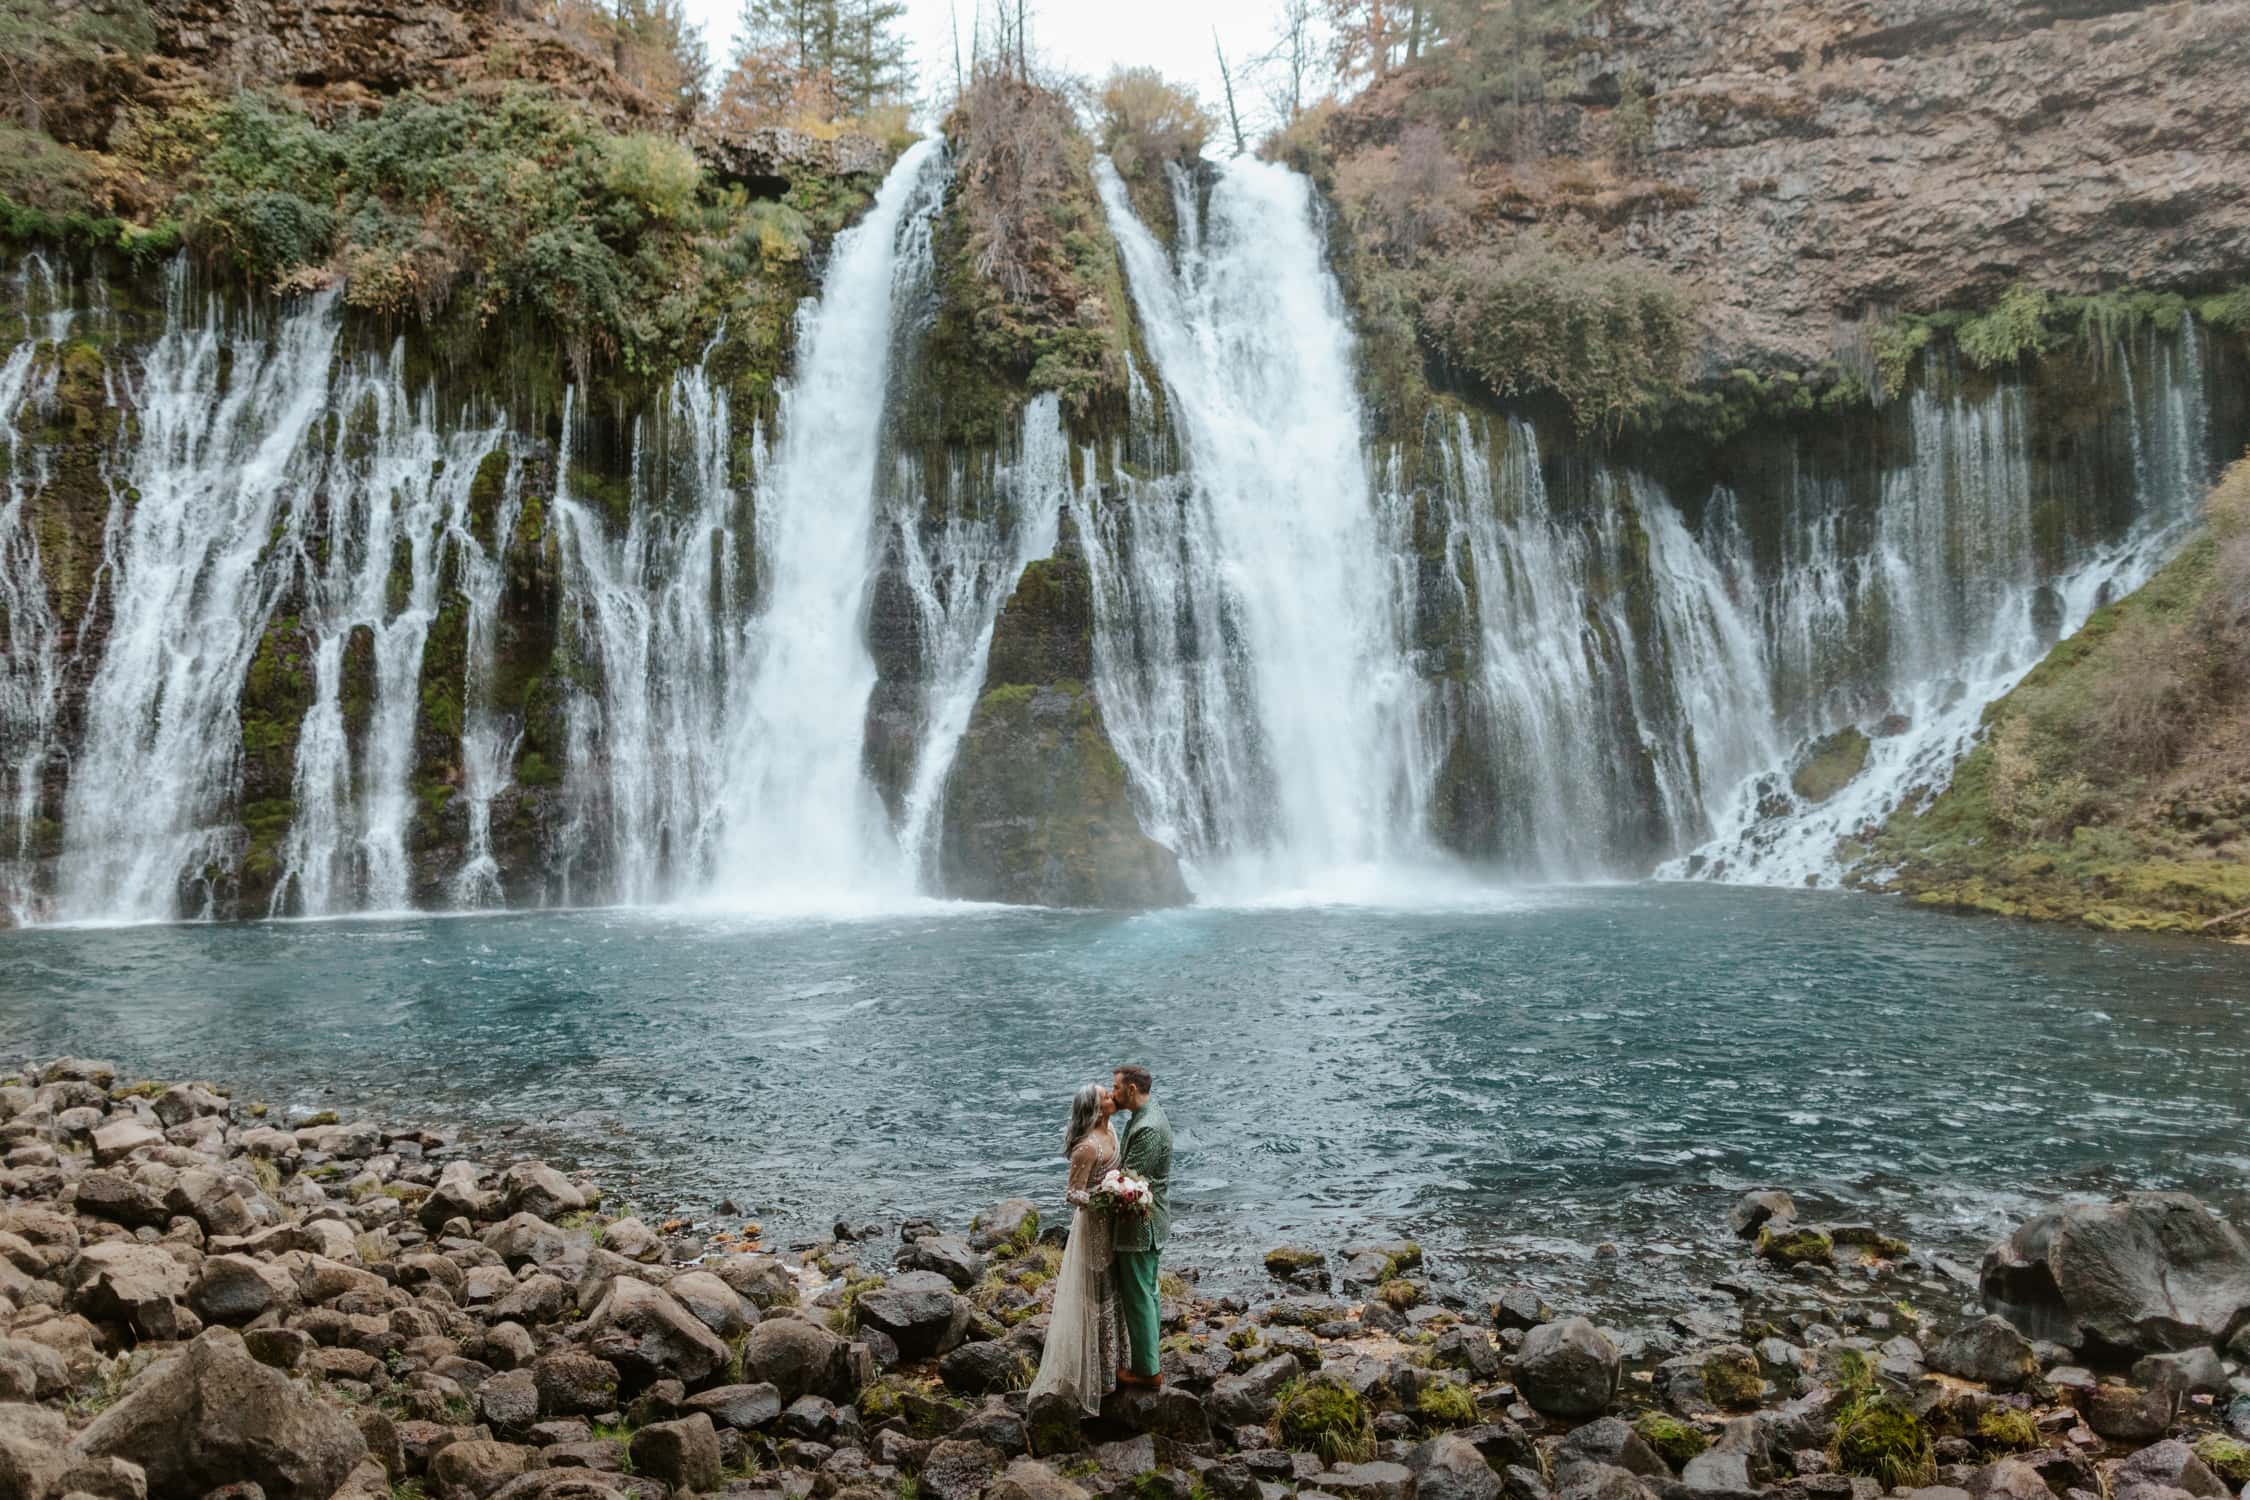 A couple in Indian wedding attire kissing each other in front of Burney Falls in Northern California.